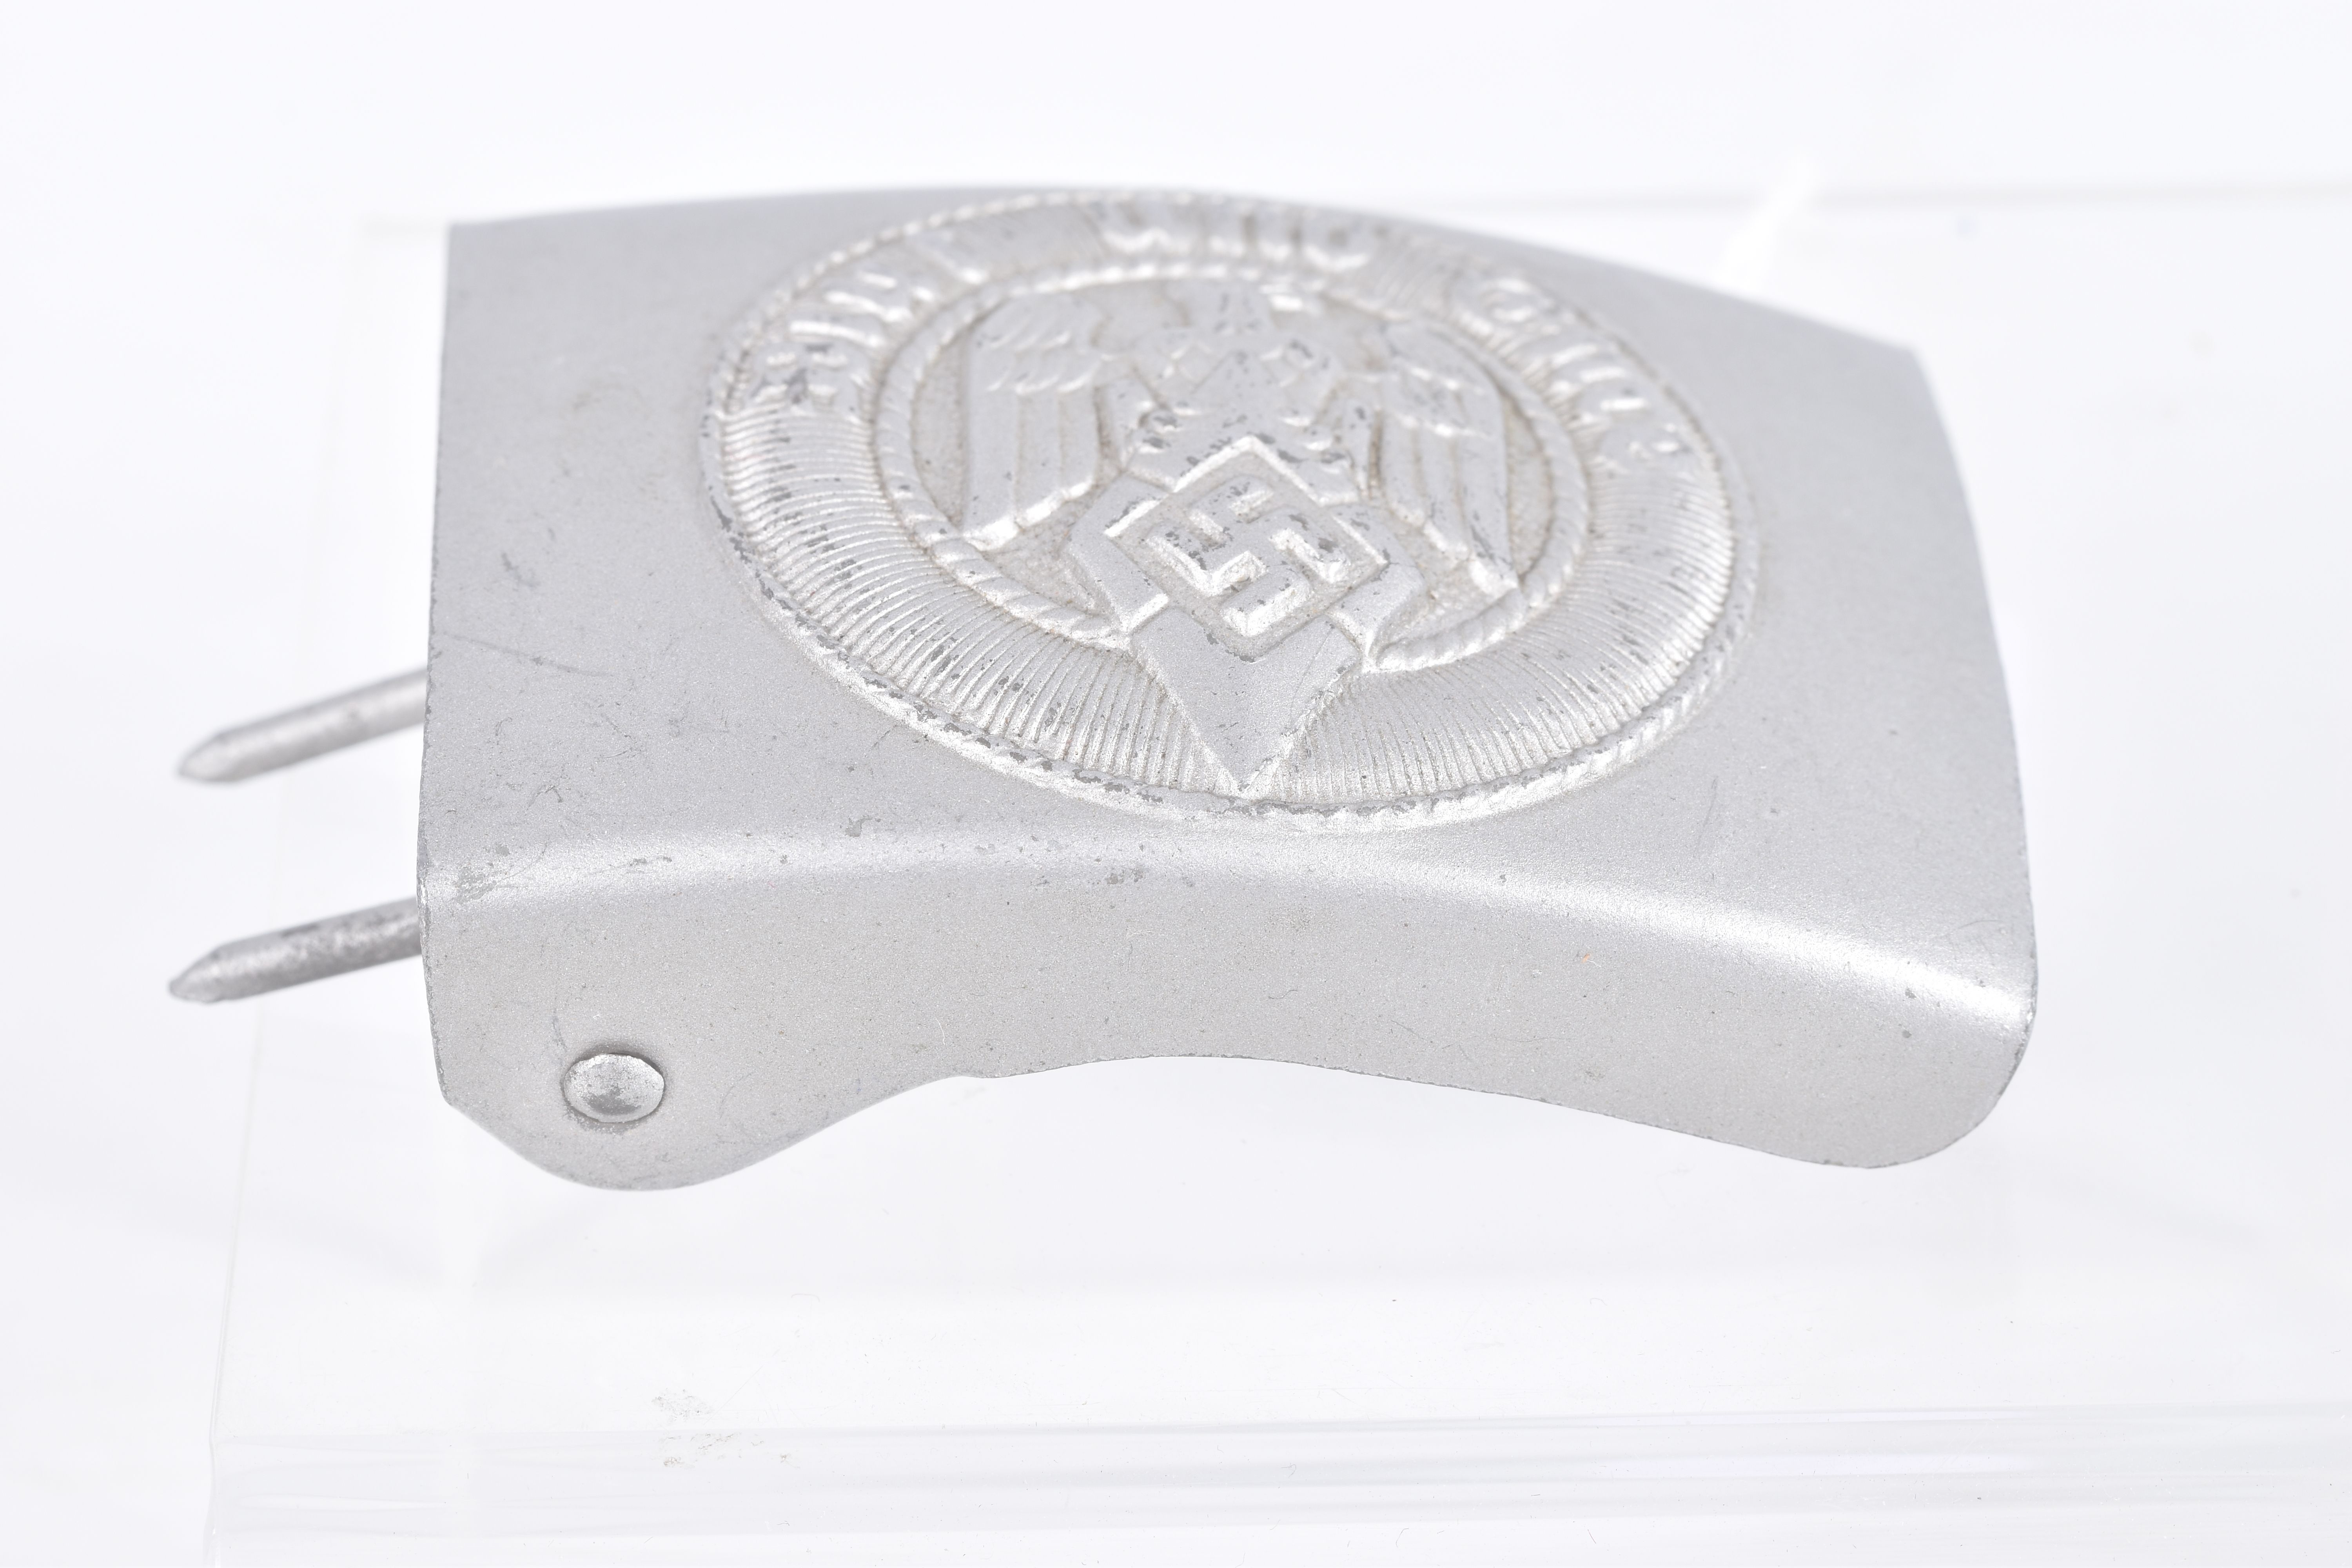 A THIRD REICH GERMAN YOUTH BELT BUCKLE, the front features a closed winged eagle - Image 6 of 8